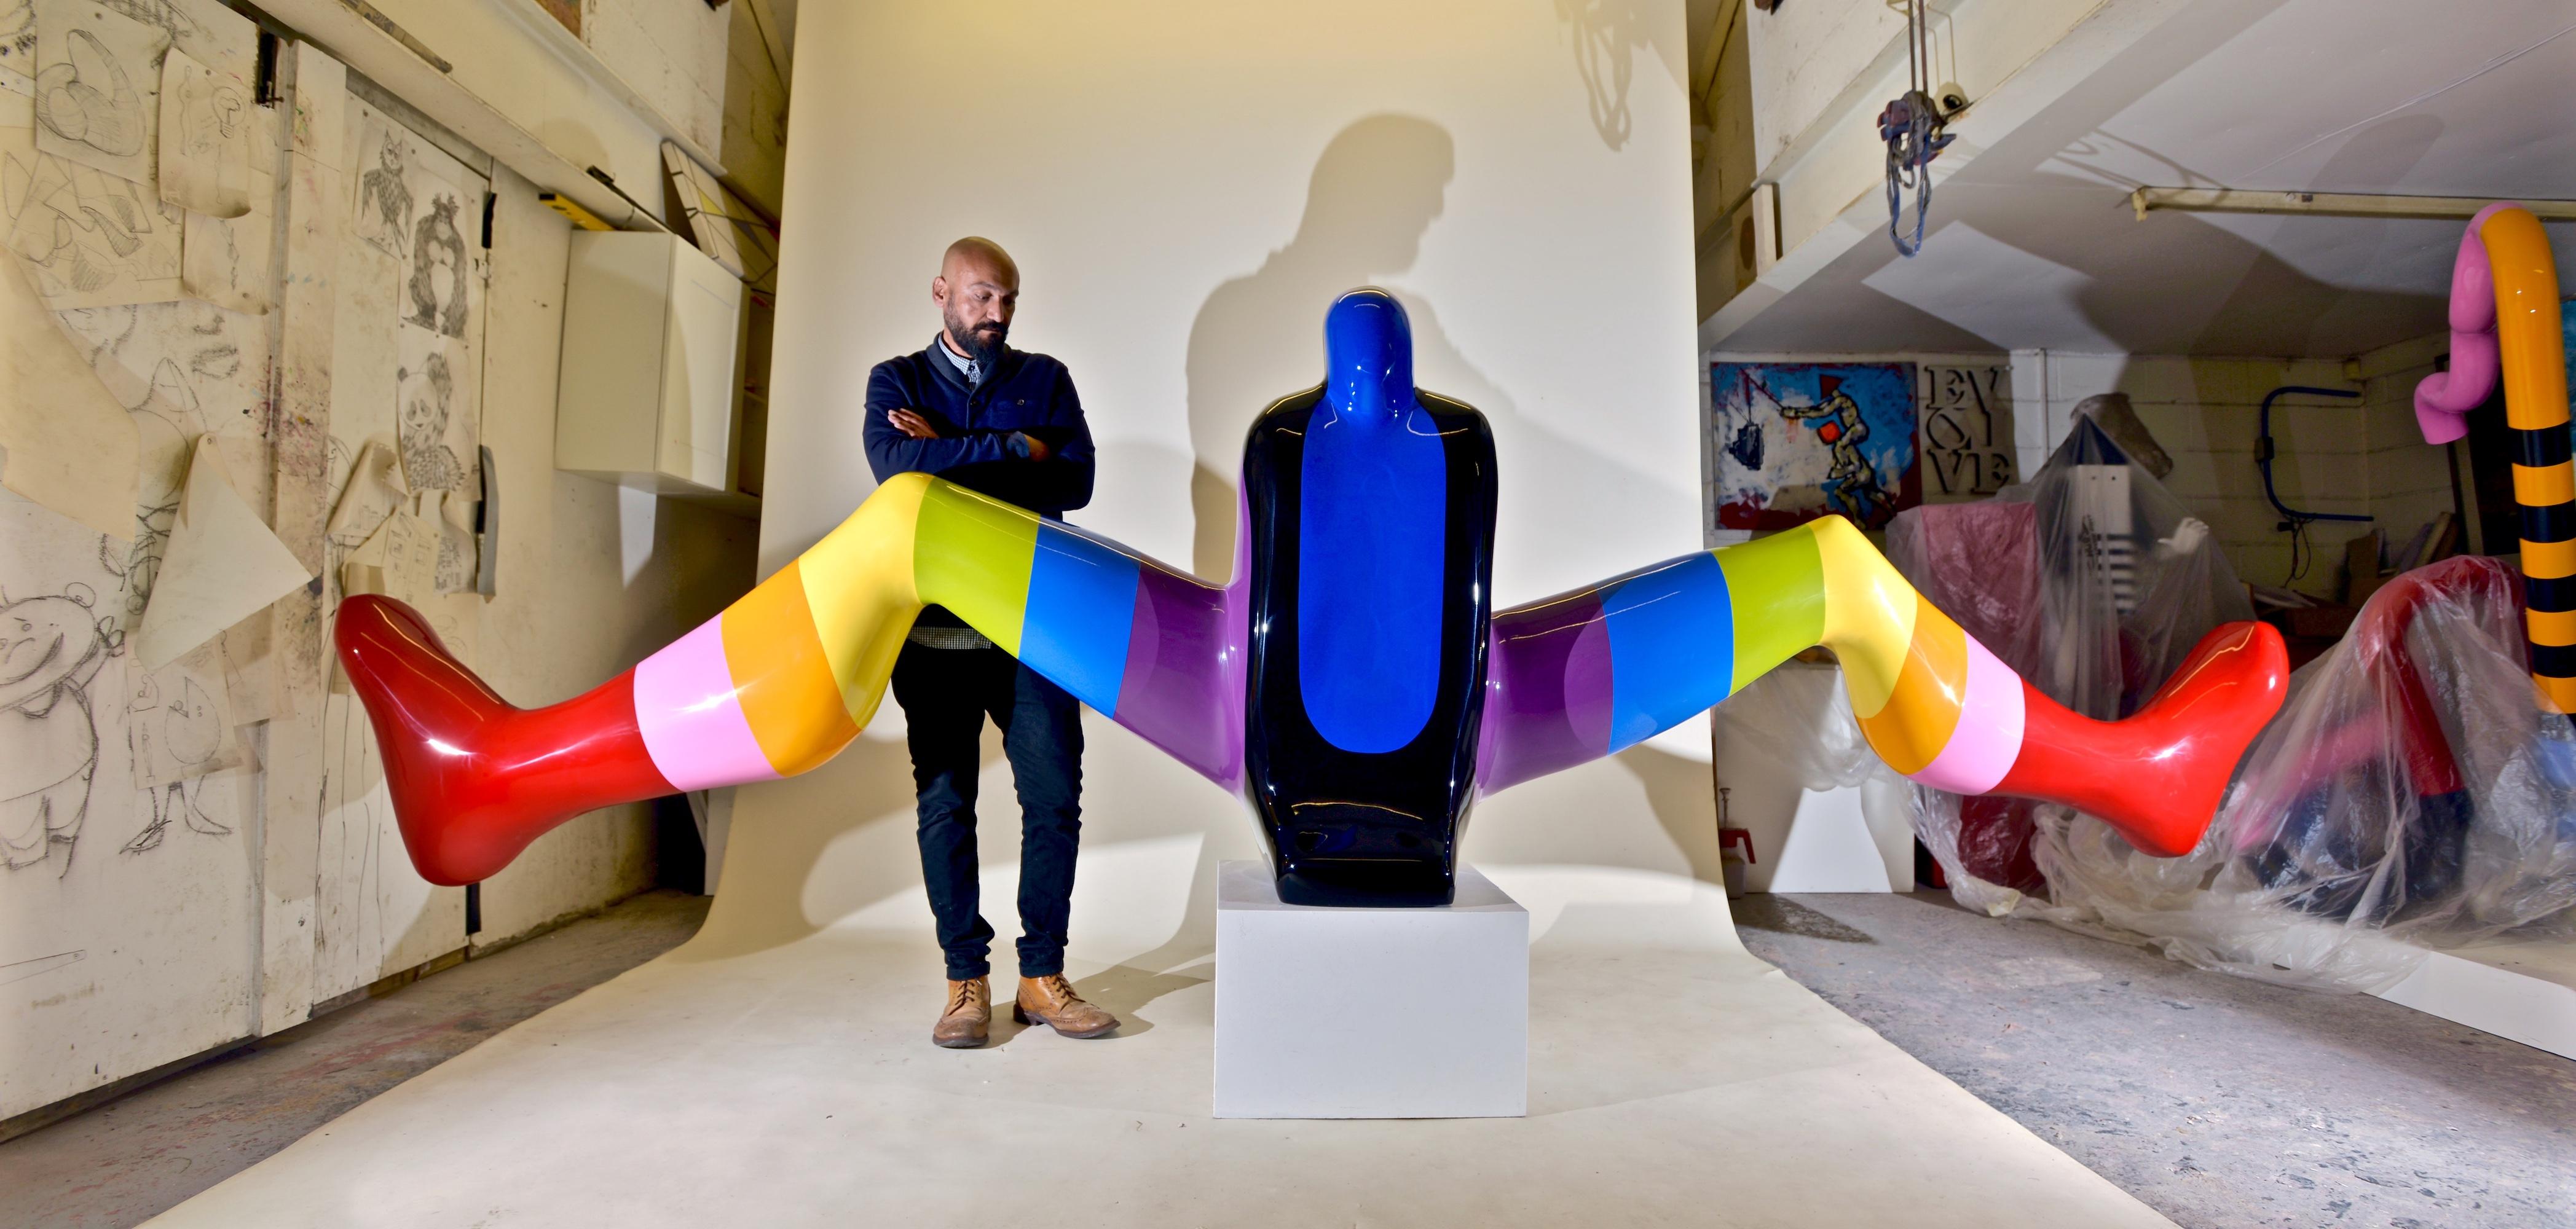 Graduating in 1997 with a first class BA degree with honors from Helwen University of Fine Arts in Cairo, Egyptian born sculptor Sam Shendi creates joyfully coloured abstractions of the human figure which, with the subtlest of indicators, hint at